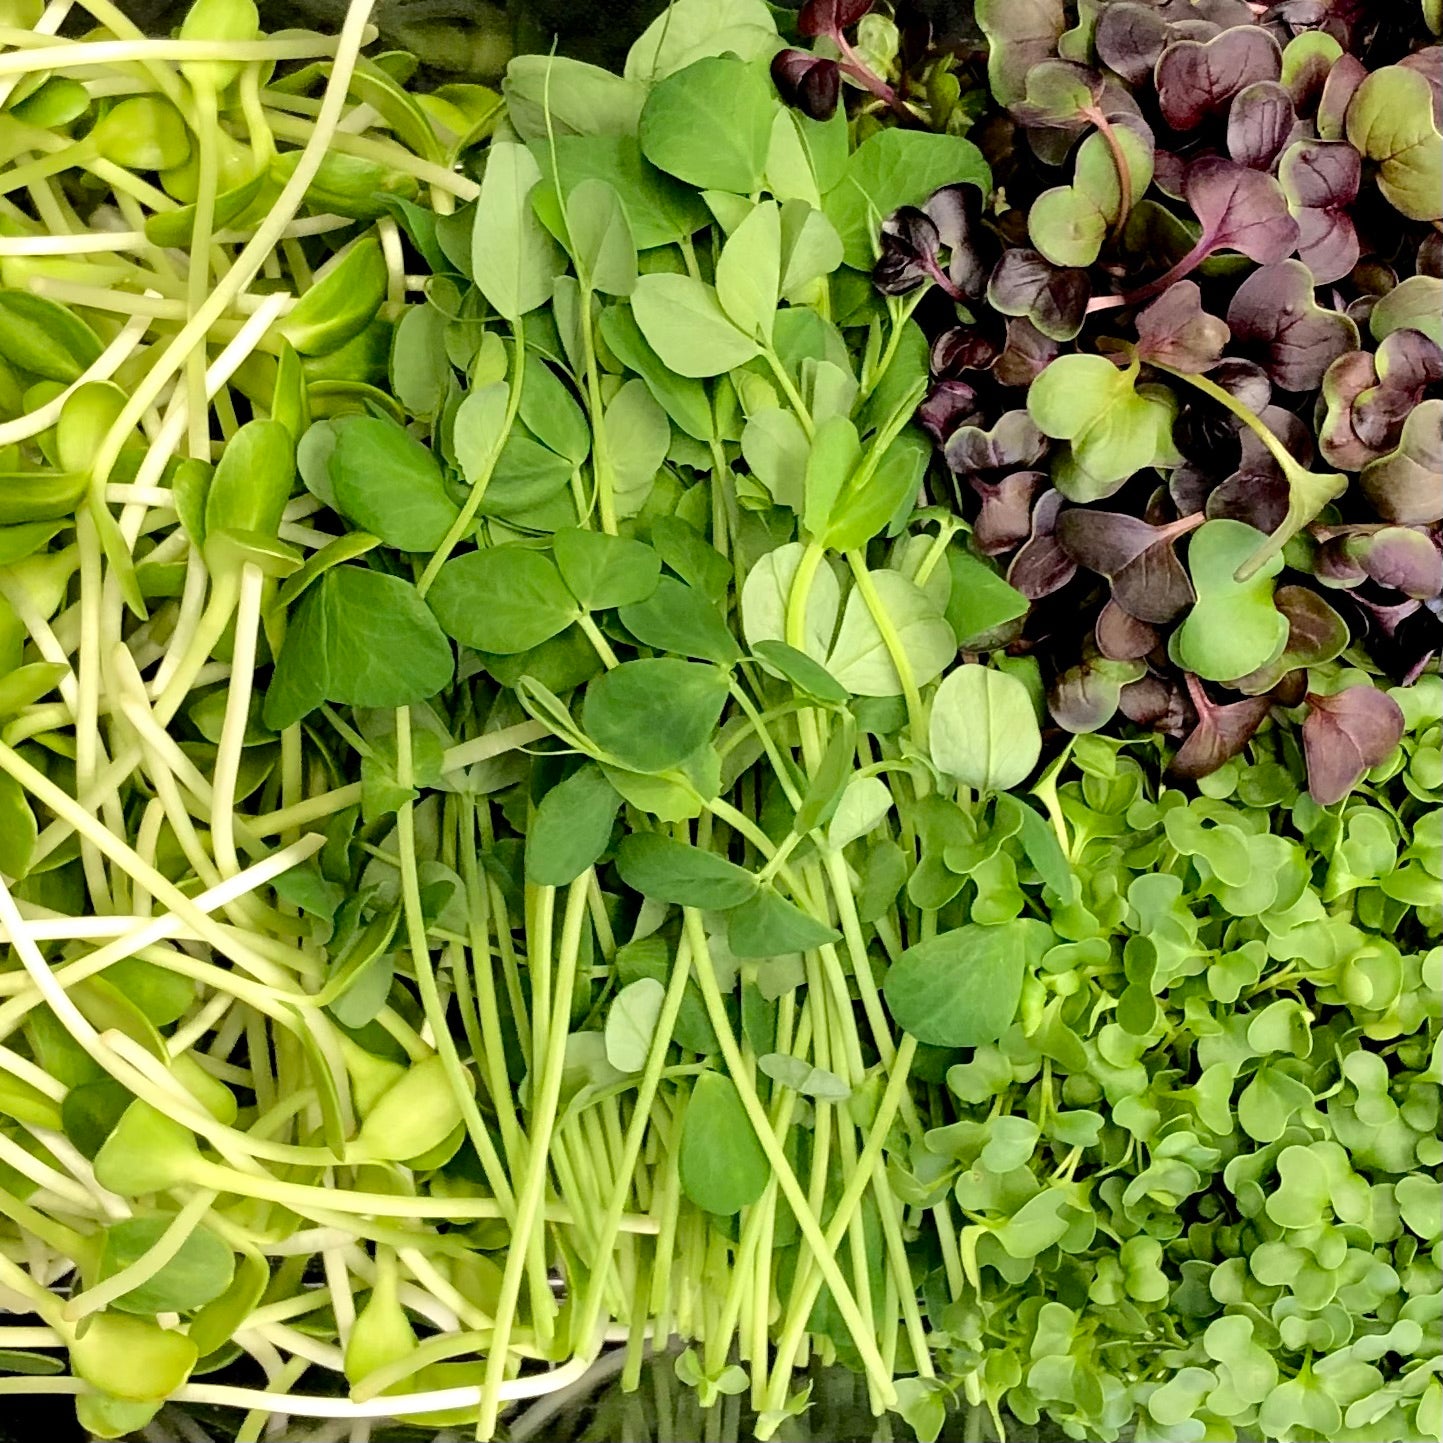 Seaside Sampler is a large box which houses 4 microgreen varietals including broccoli, radish, sweet pea and sunflower. Broccoli has green heart shaped leaves, radish has purple and green heart shaped leaves, sweet pea has long slender stems with oval leaves and tendrils, and sunflowers have long thick stems with green oval leaves.